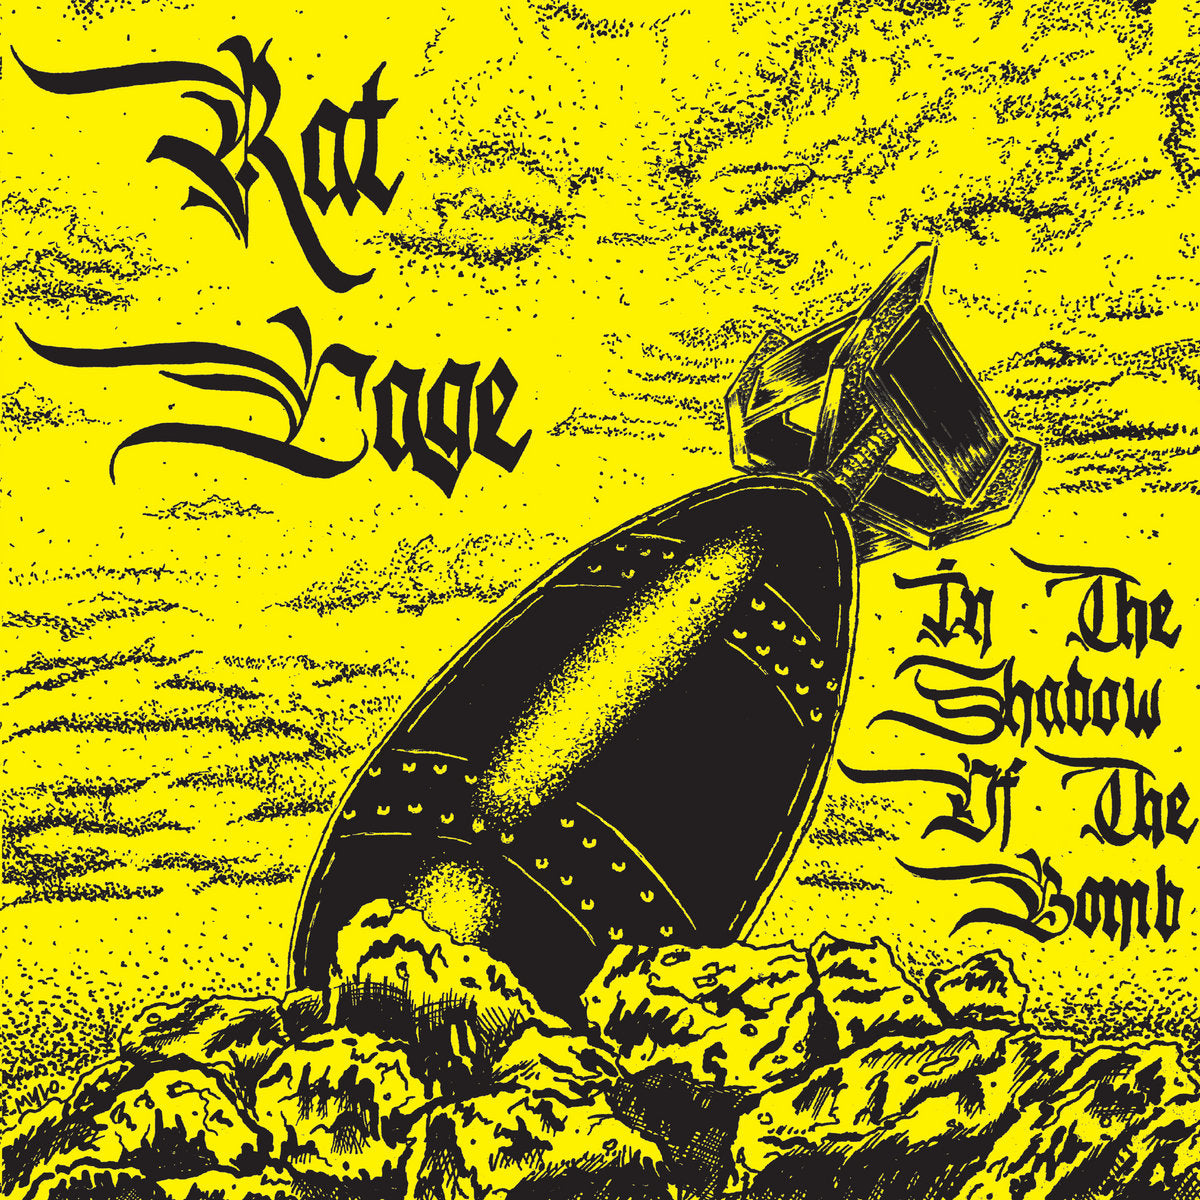 RAT CAGE - IN THE SHADOW OF THE BOMB Vinyl 7"